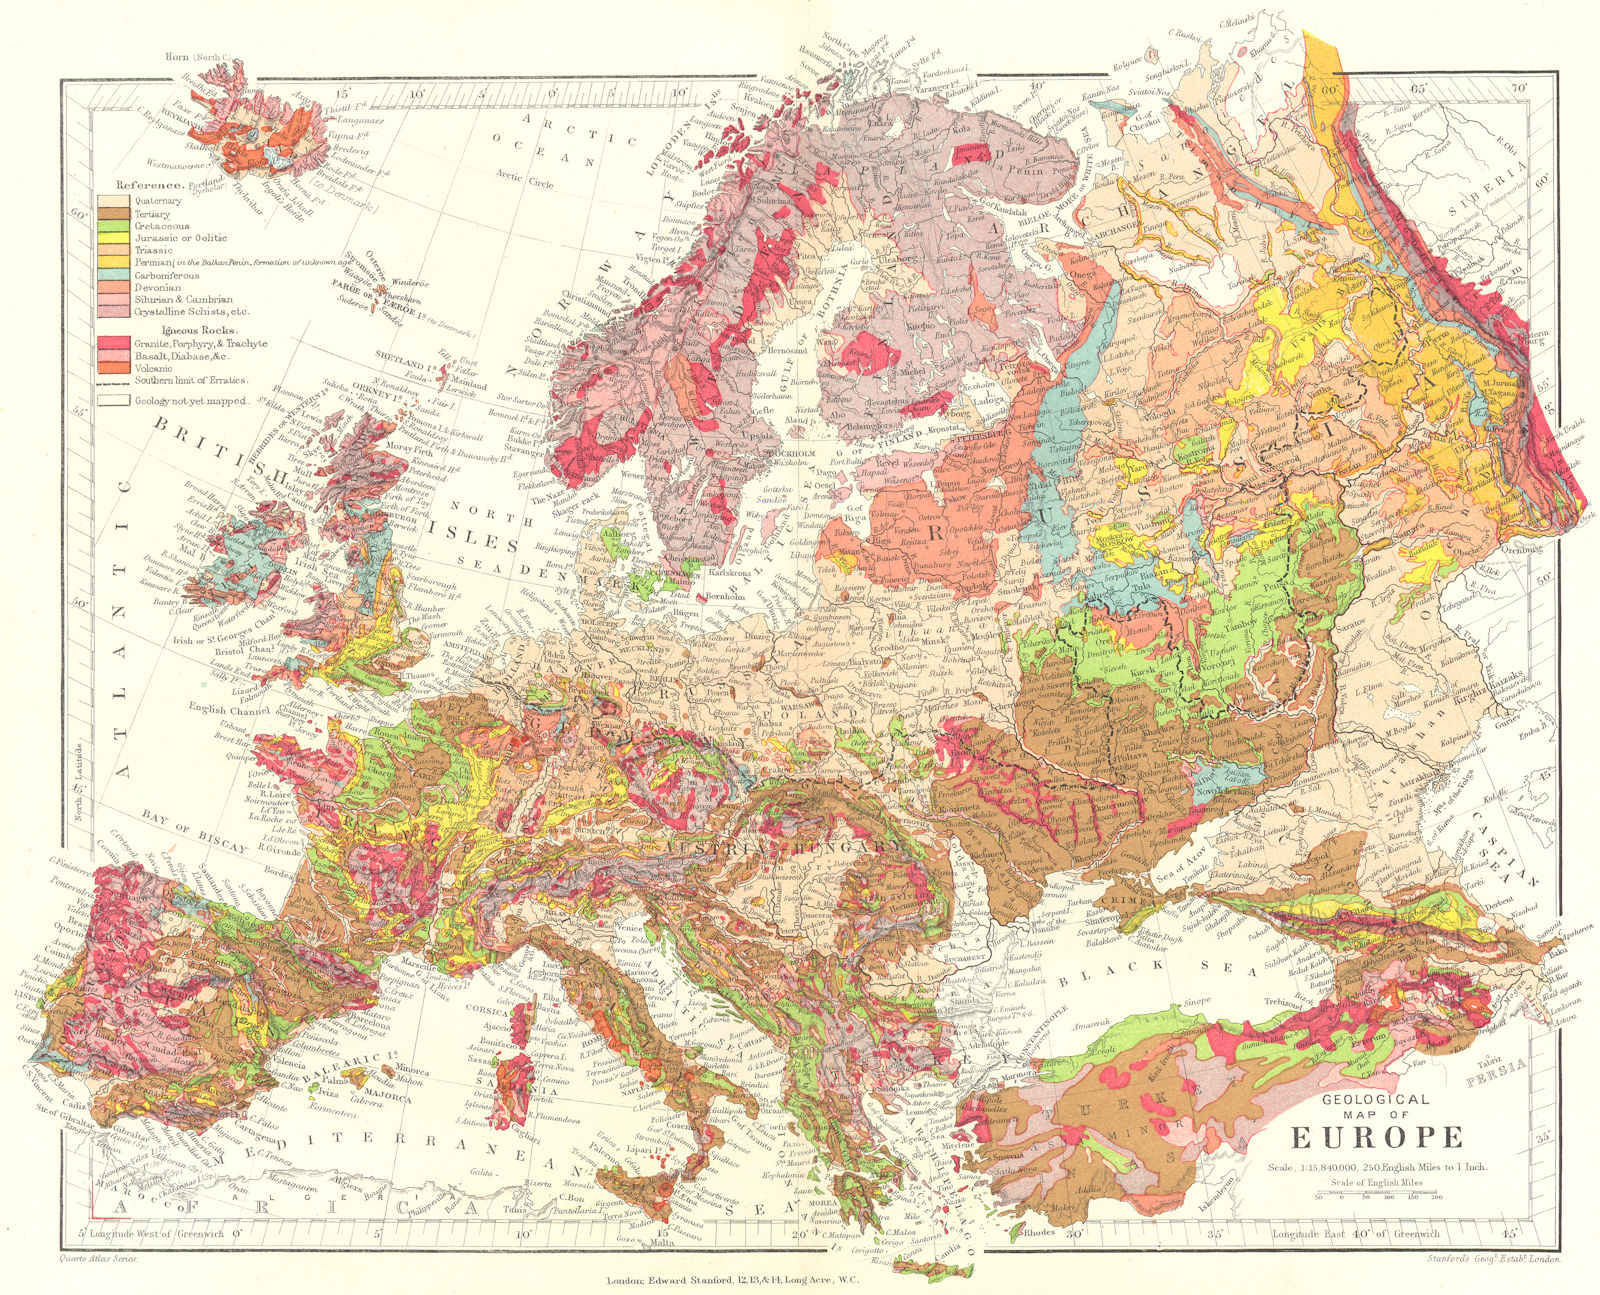 EUROPE GEOLOGICAL. Tertiary Jurassic Triassic Cretaceous &c. STANFORD 1906 map